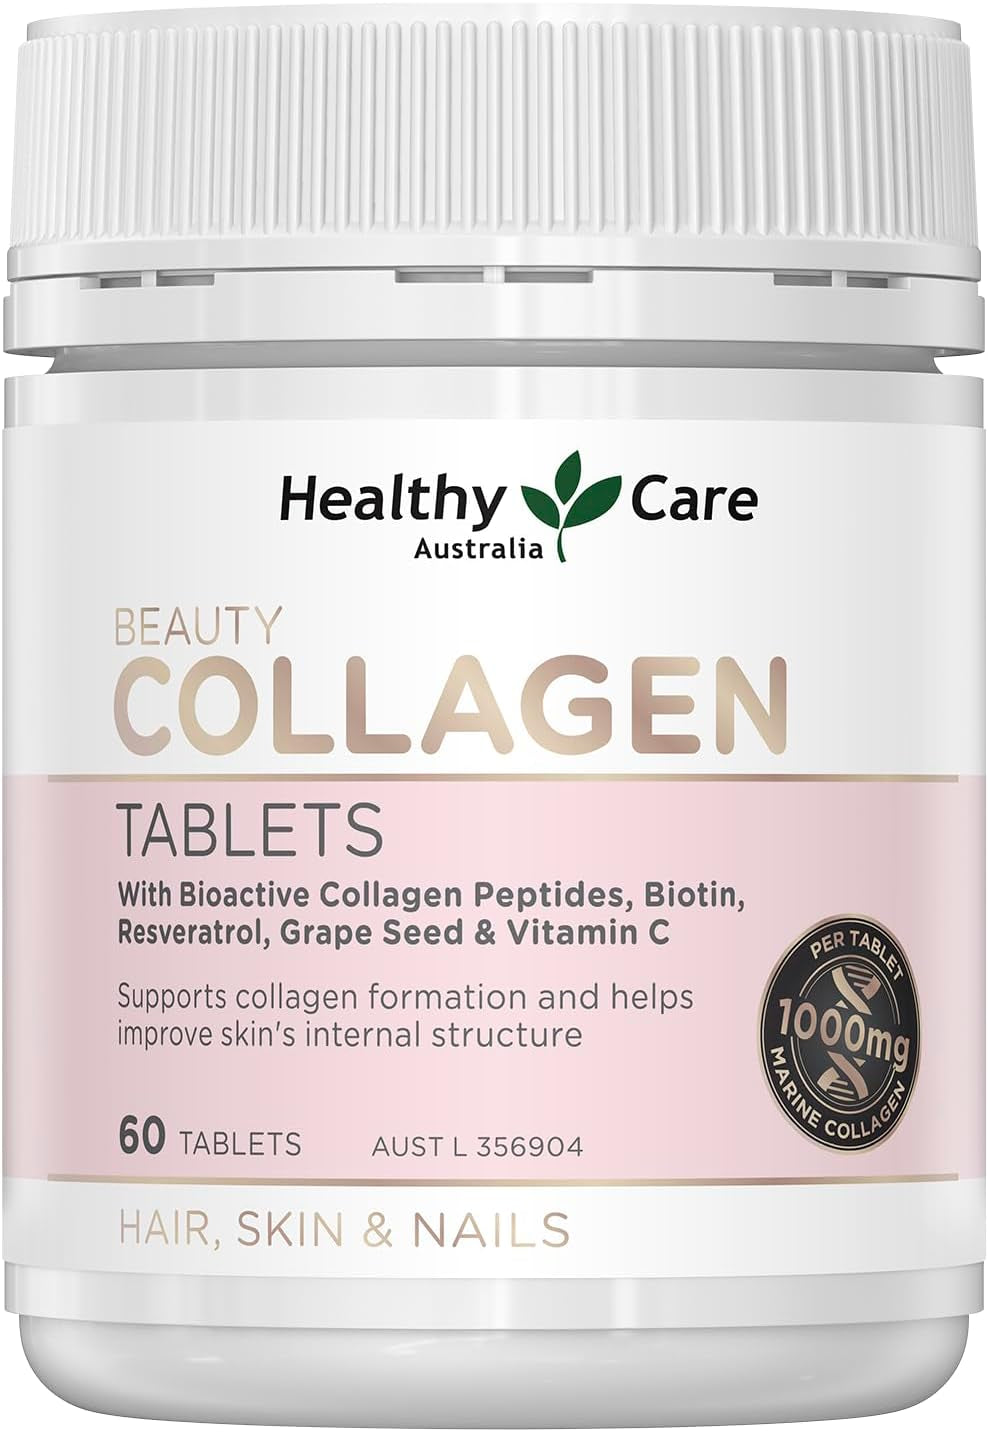 Beauty Collagen - 60 Tablets | with Bioactive Collagen Peptides, Biotin, Resveratrol, Grapeseed and Vitamin C